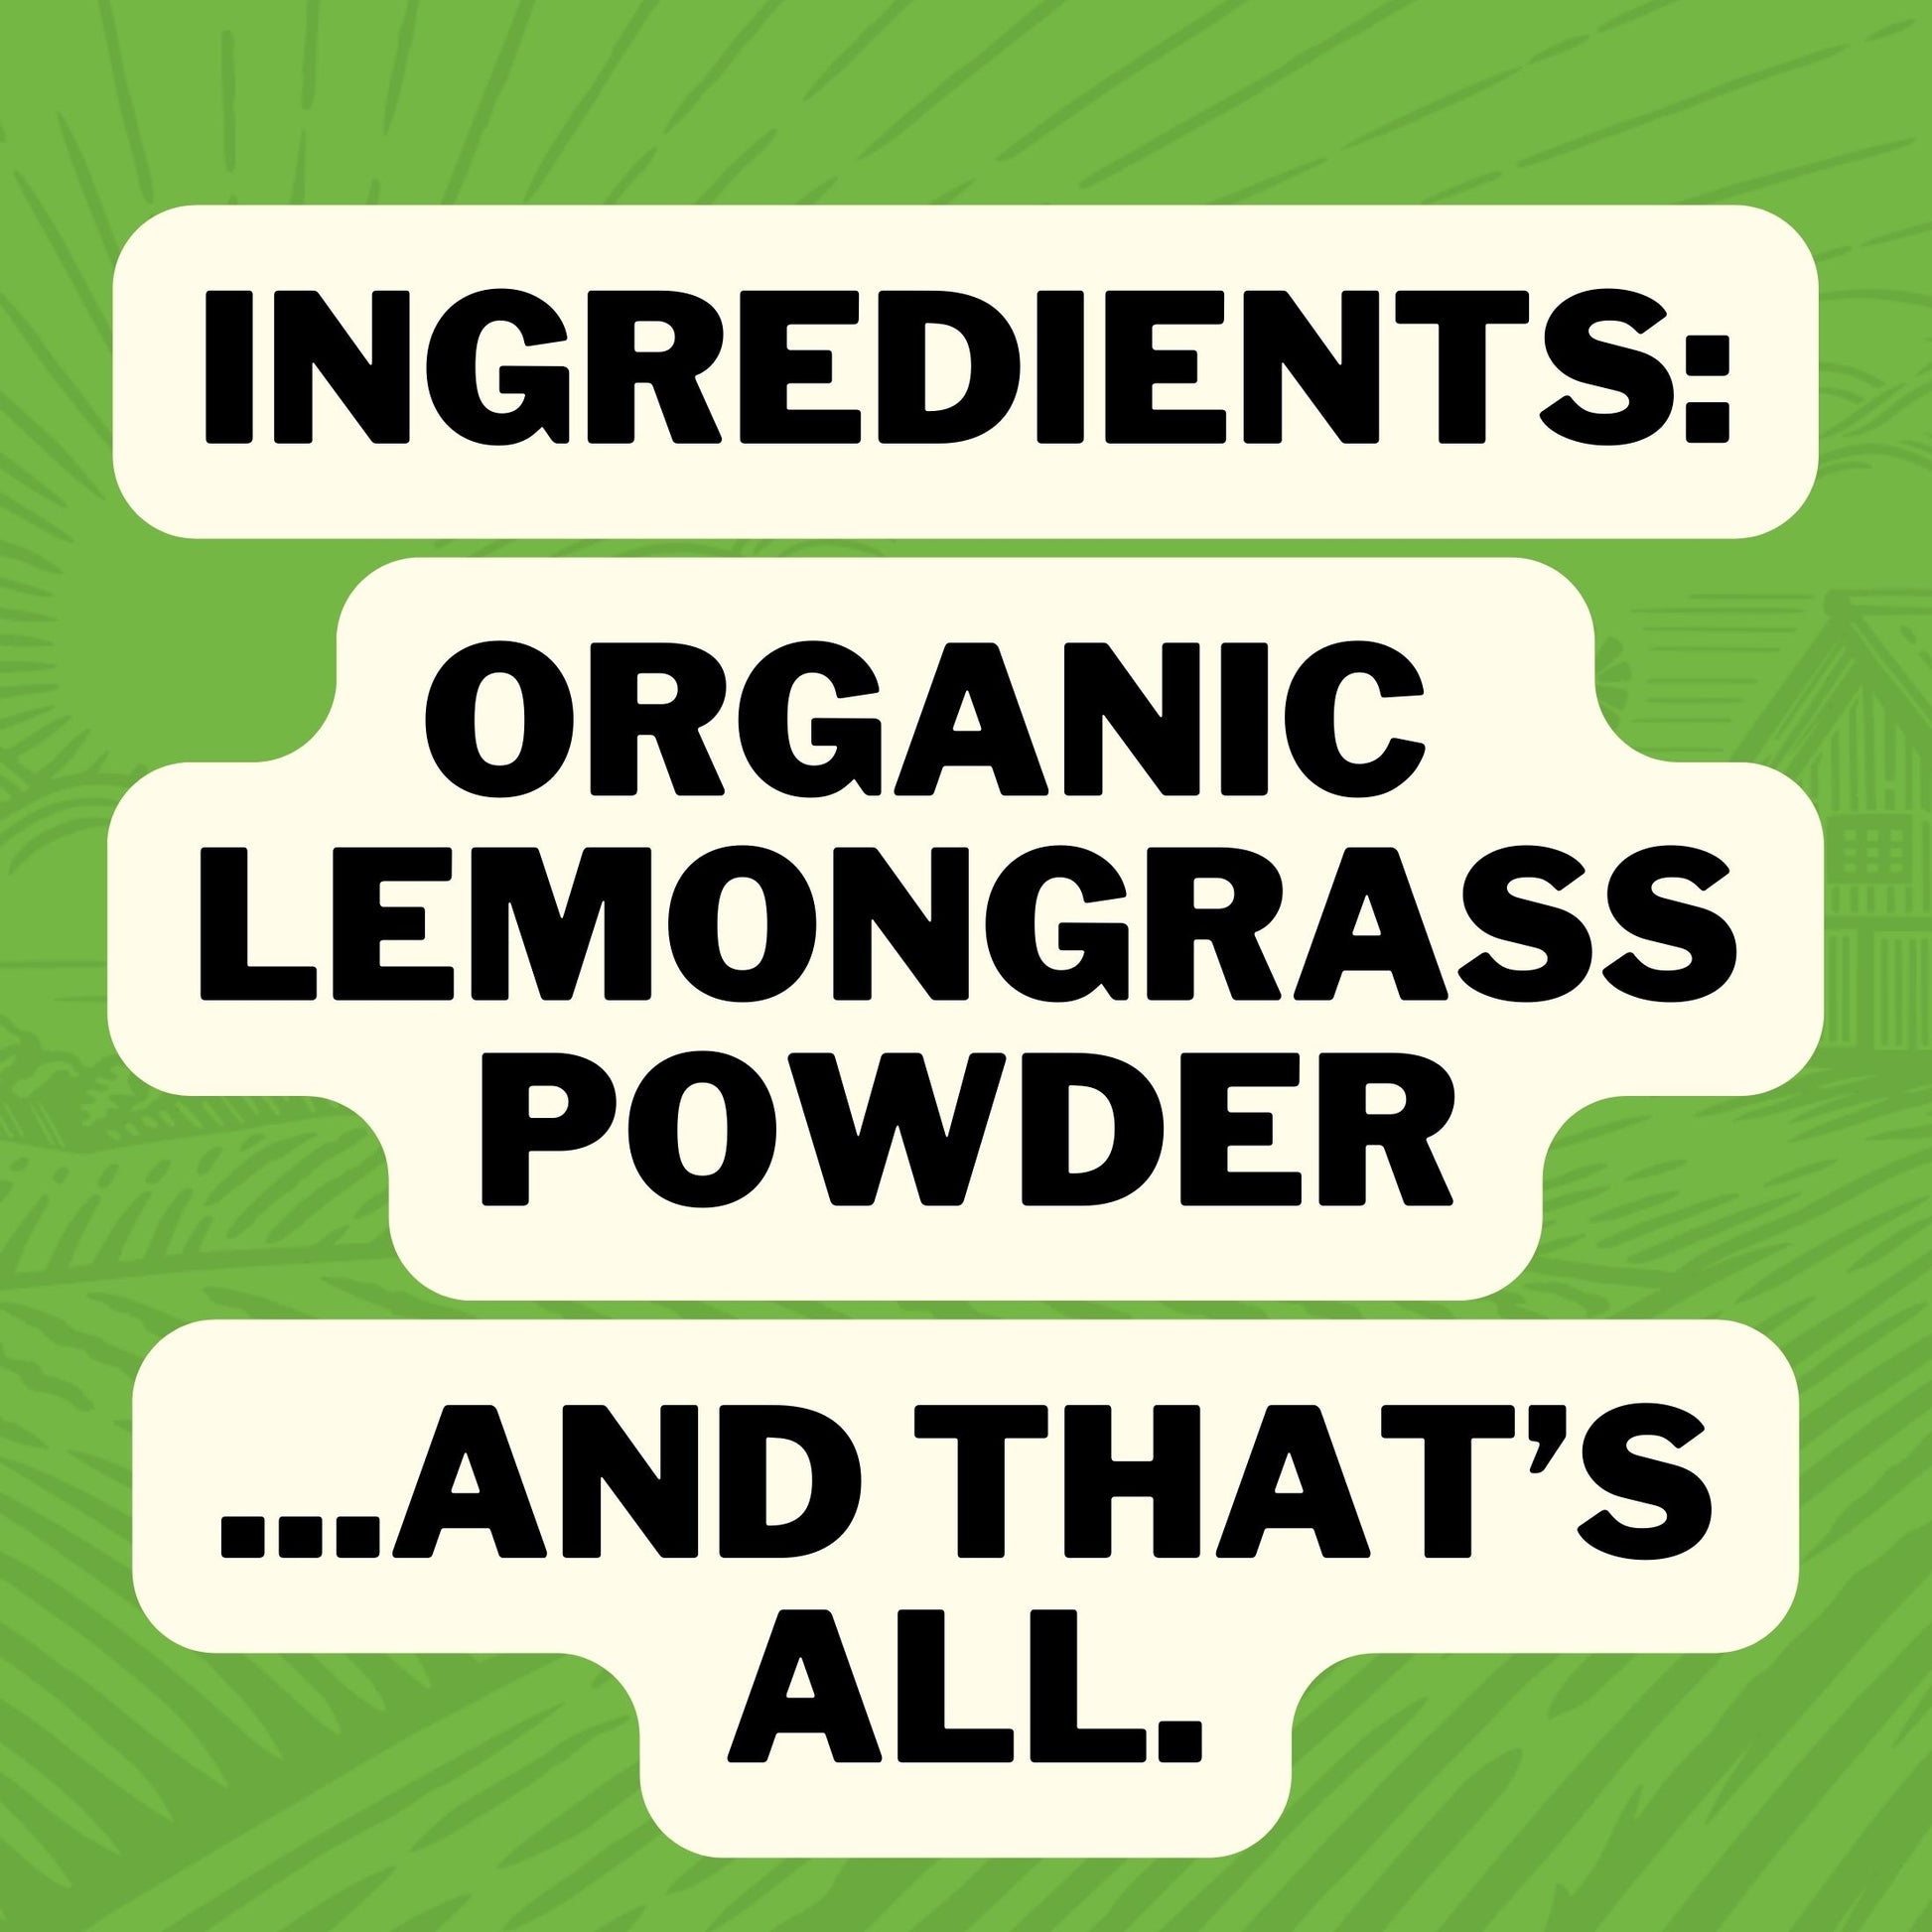 Ingredients : Organic Lemongrass Powder ... And that is all.